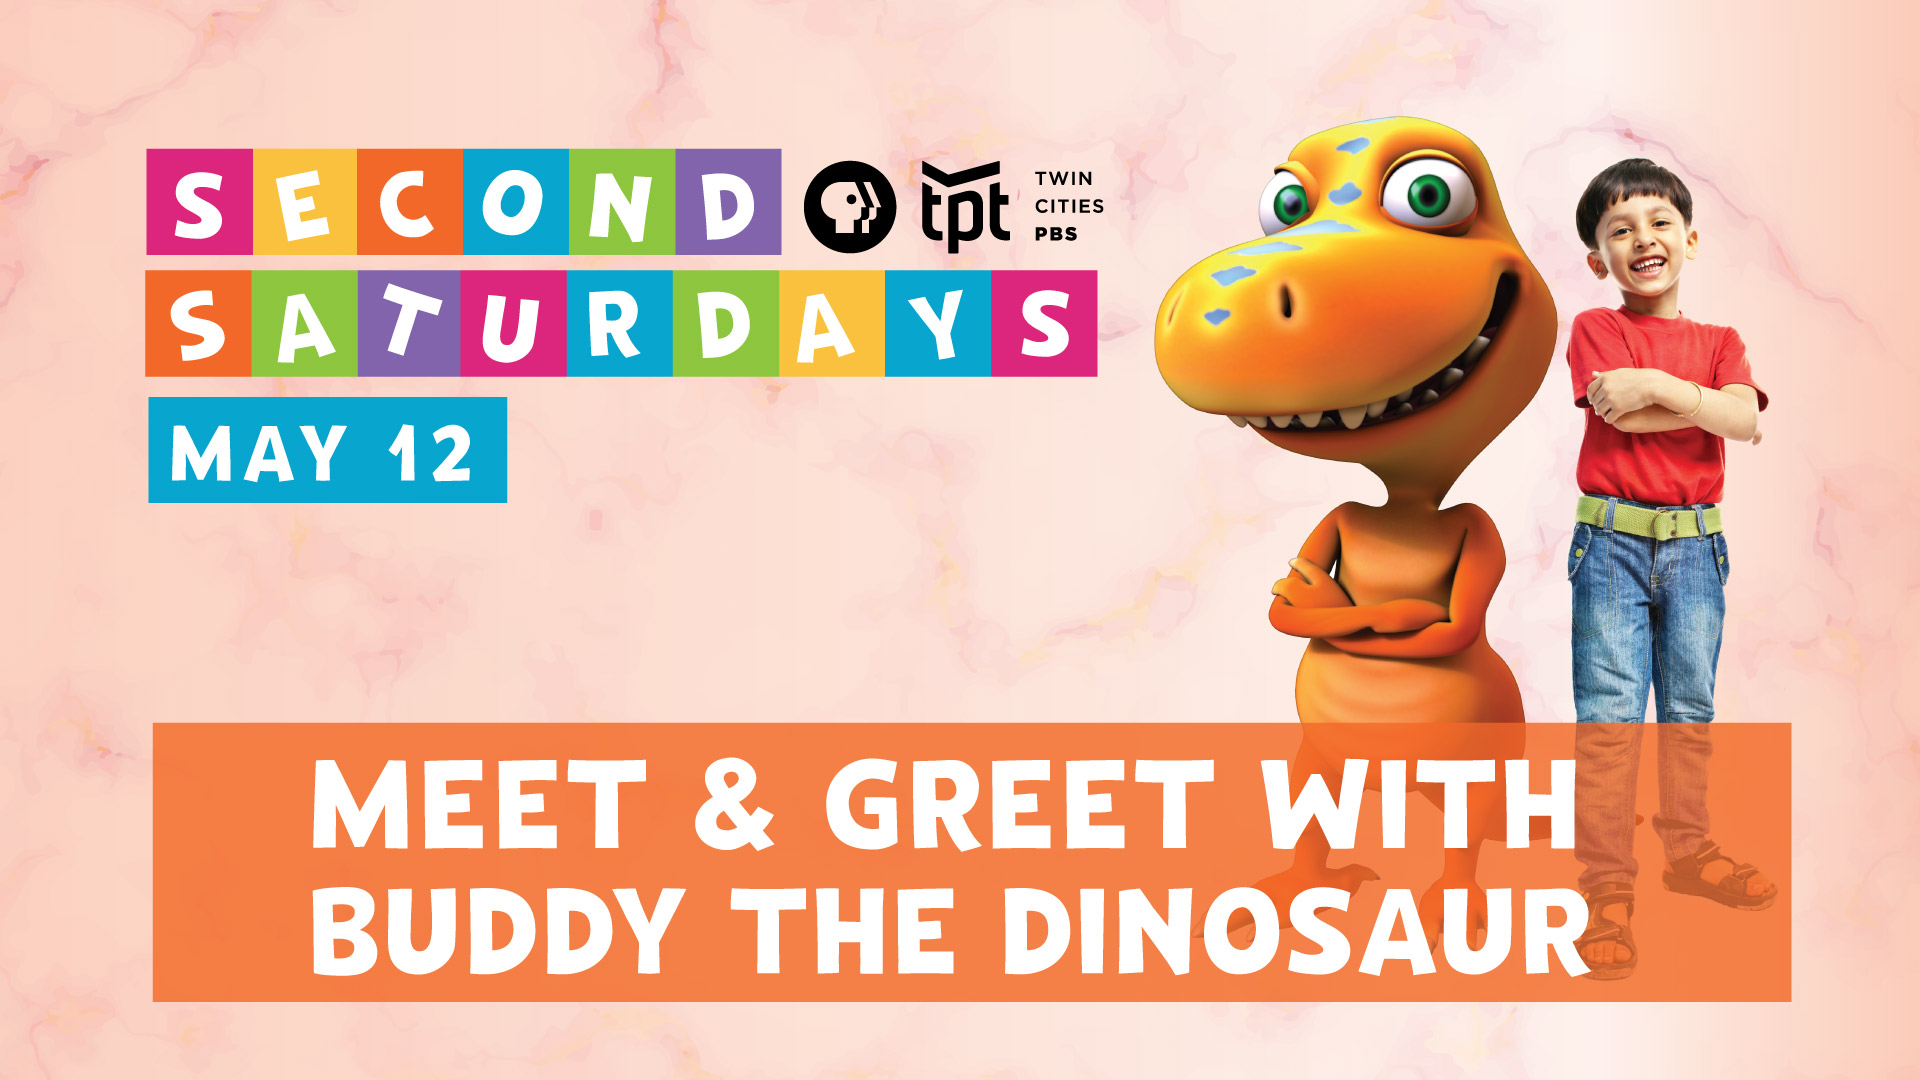 Second Saturday Meet and Greet with Buddy the Dinosaur